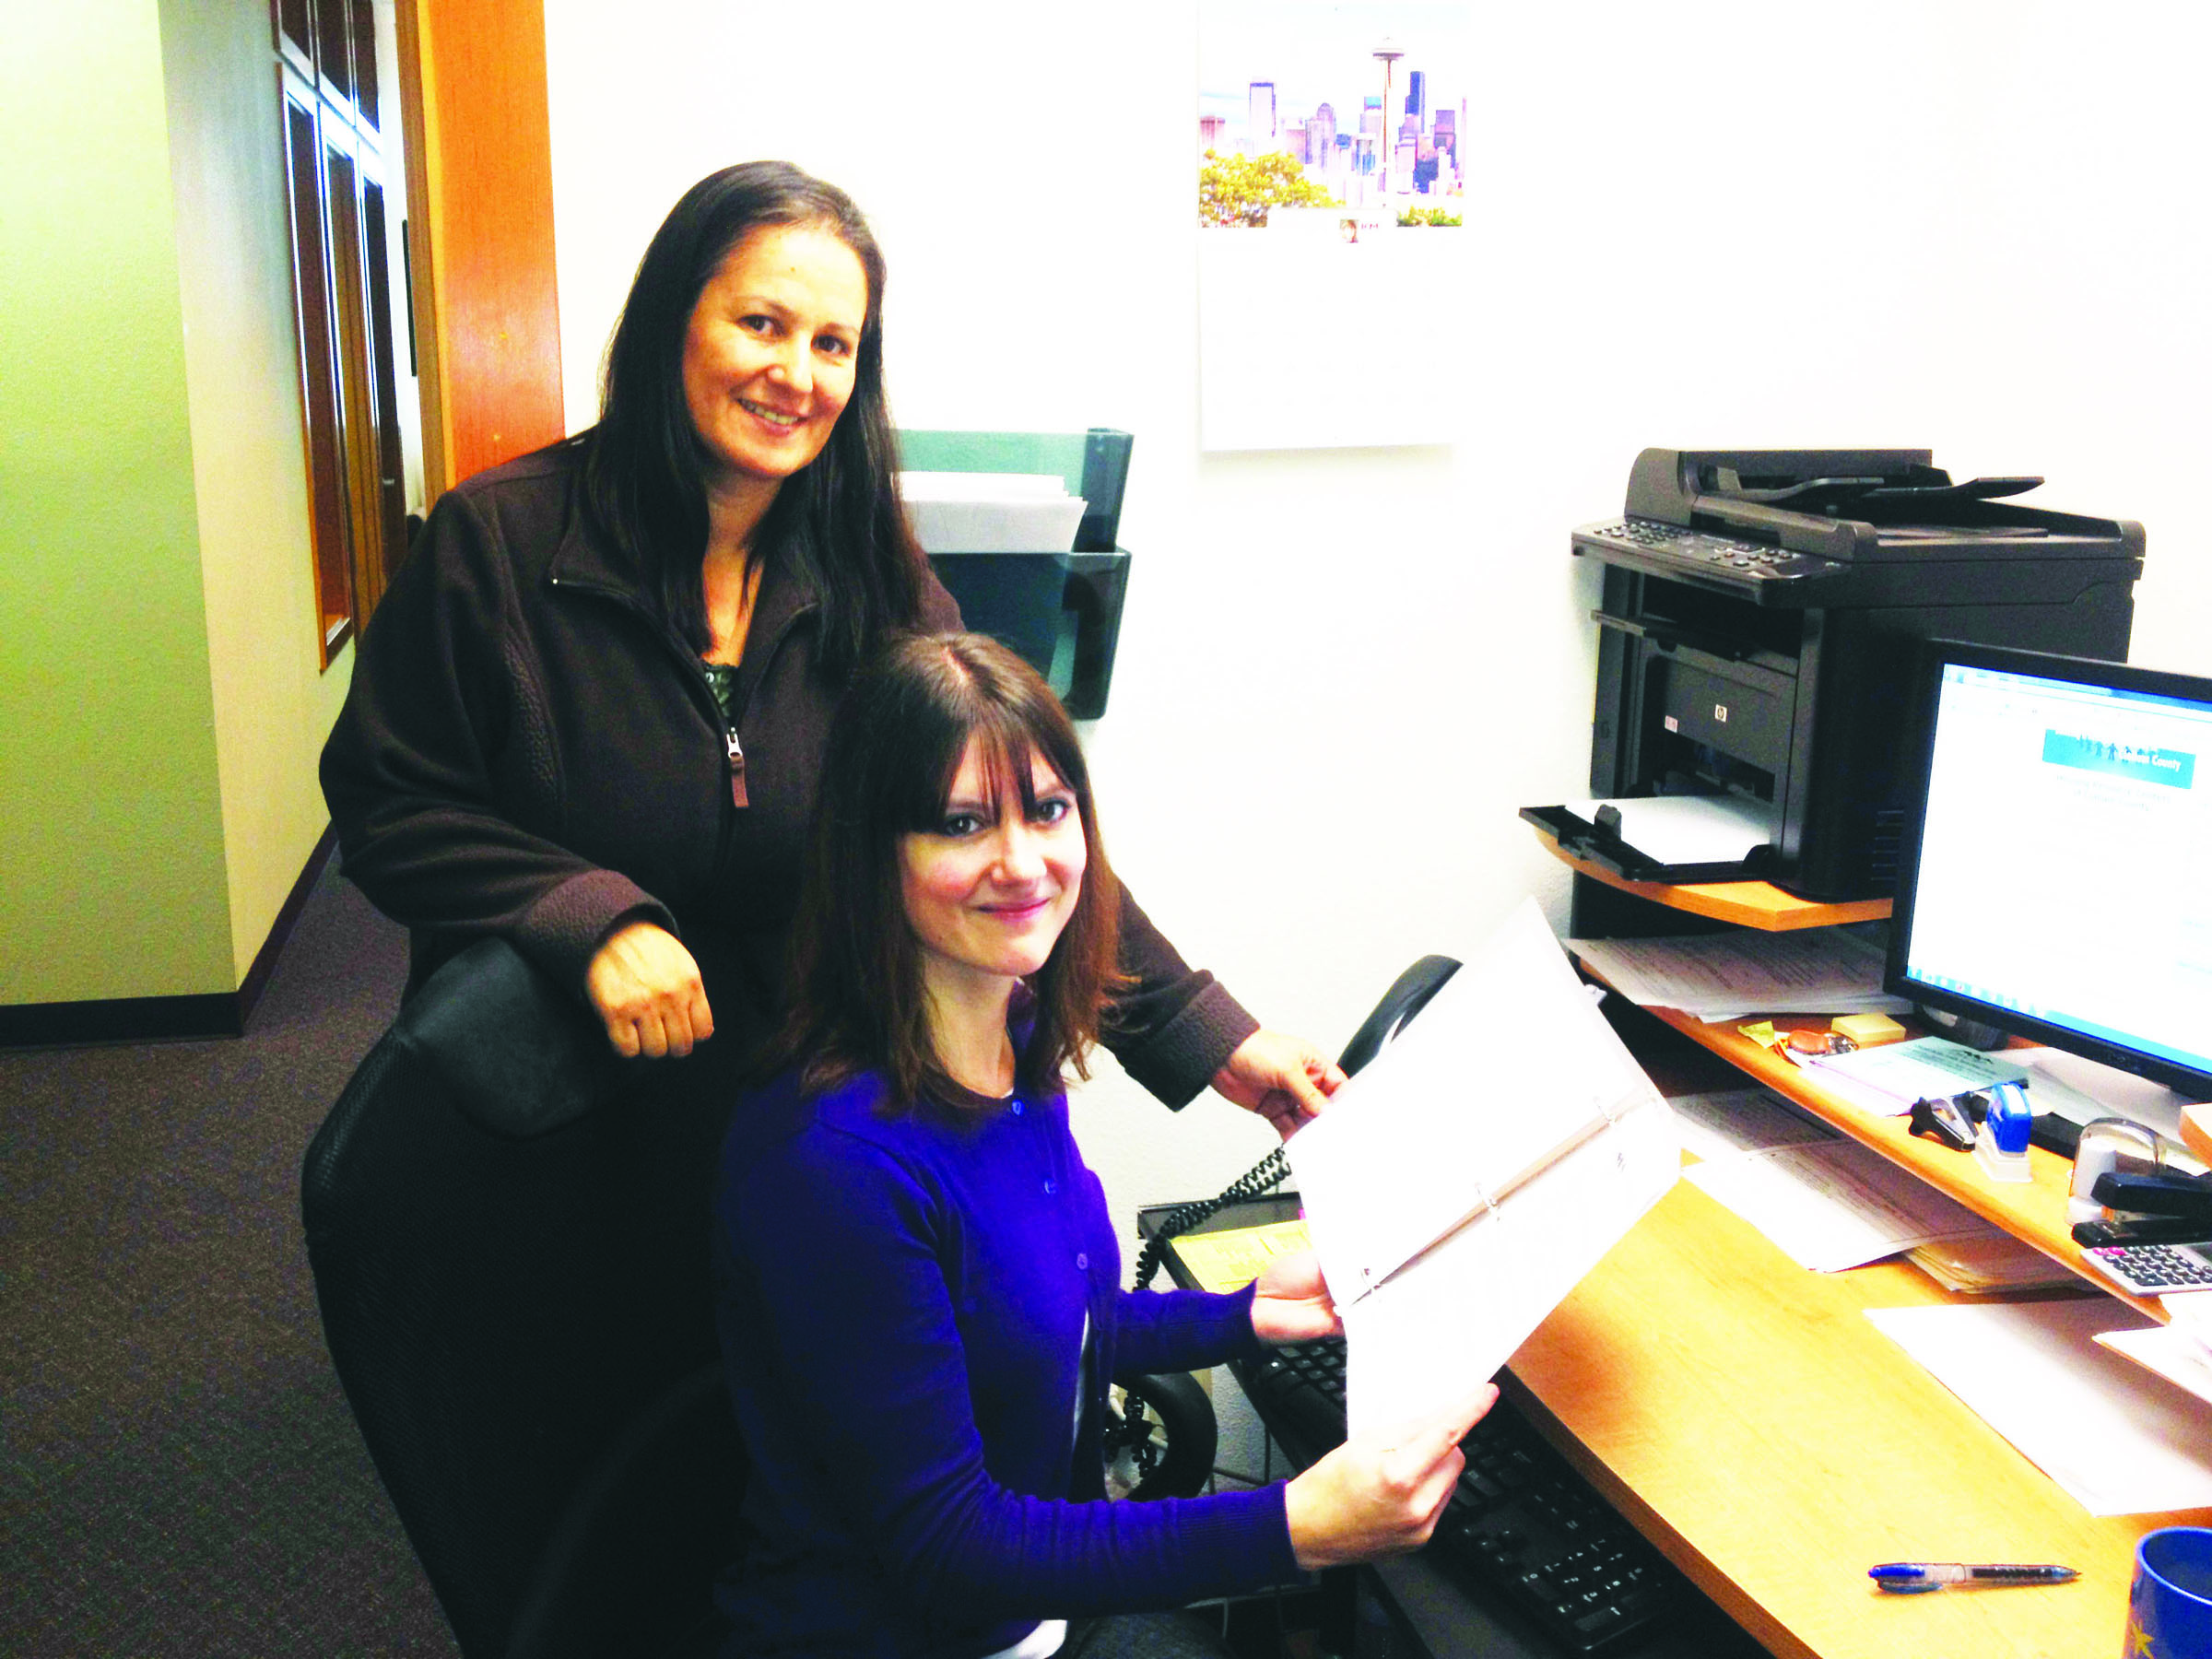 Stepping up to help by volunteering at OlyCAP is Peninsula Home Fund case manager Laura Calabria